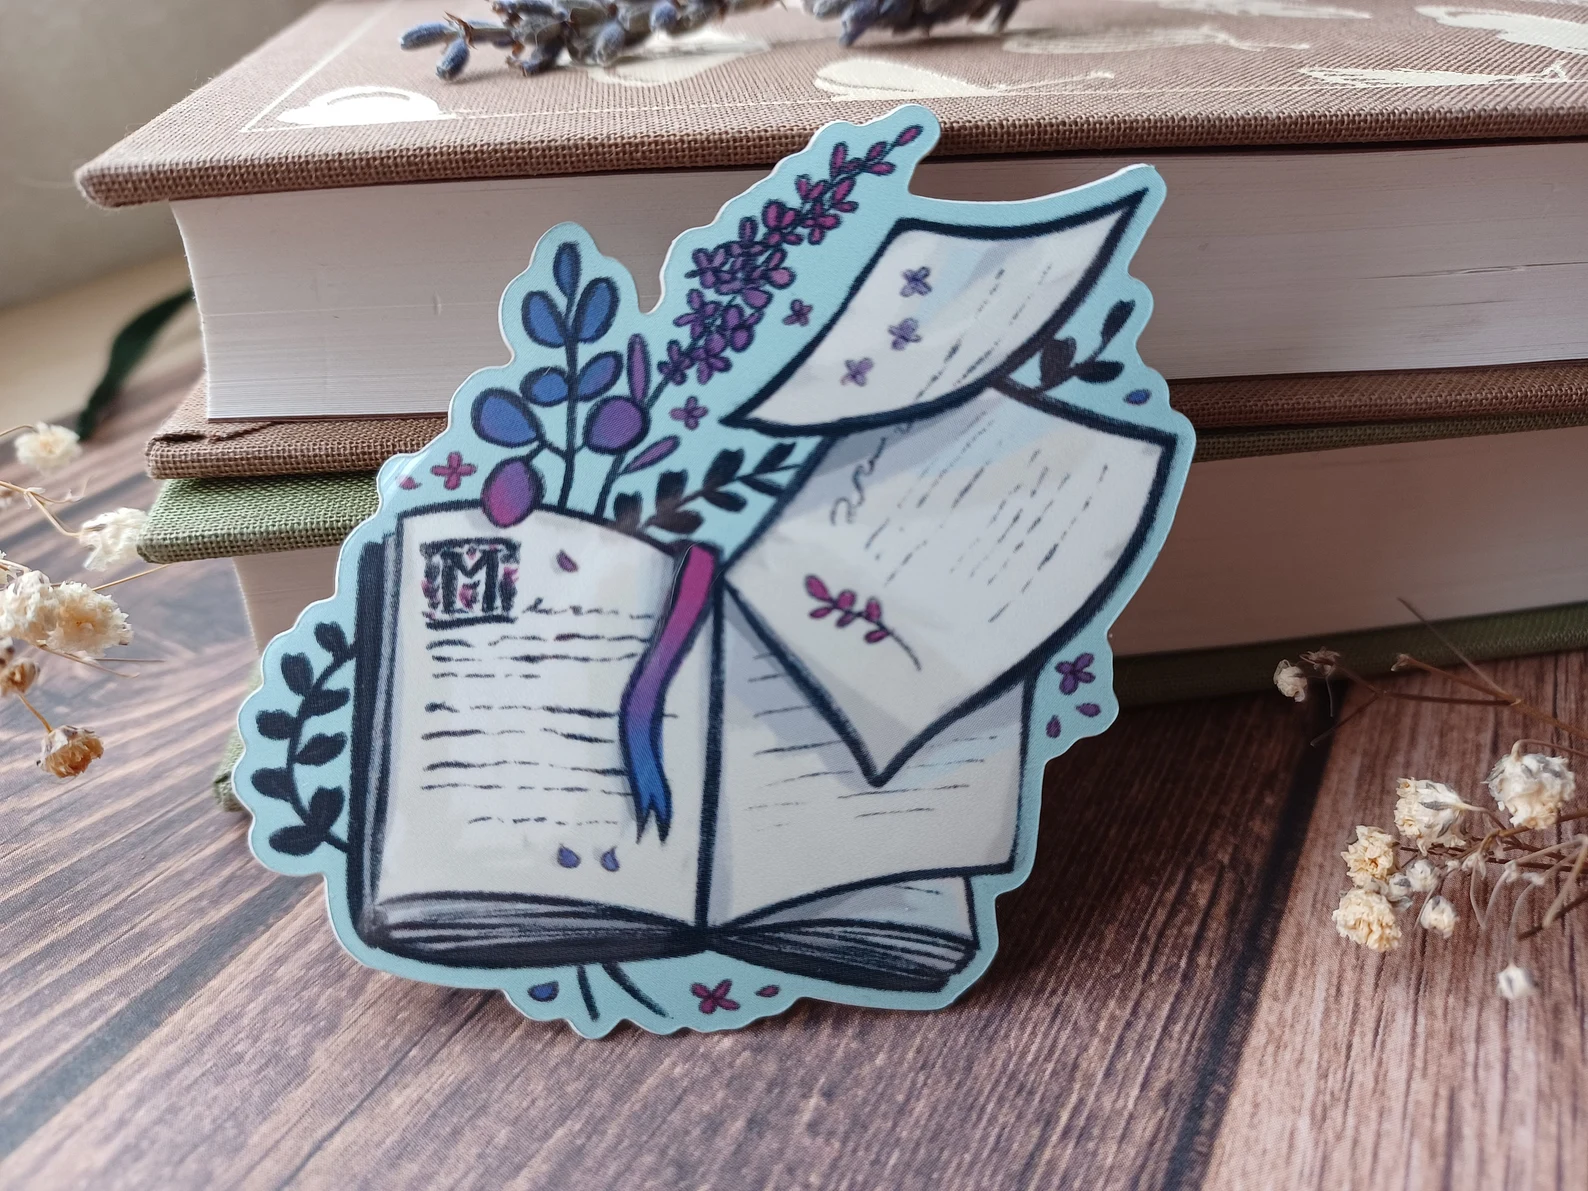 Image of an open book with lavender sprigs.